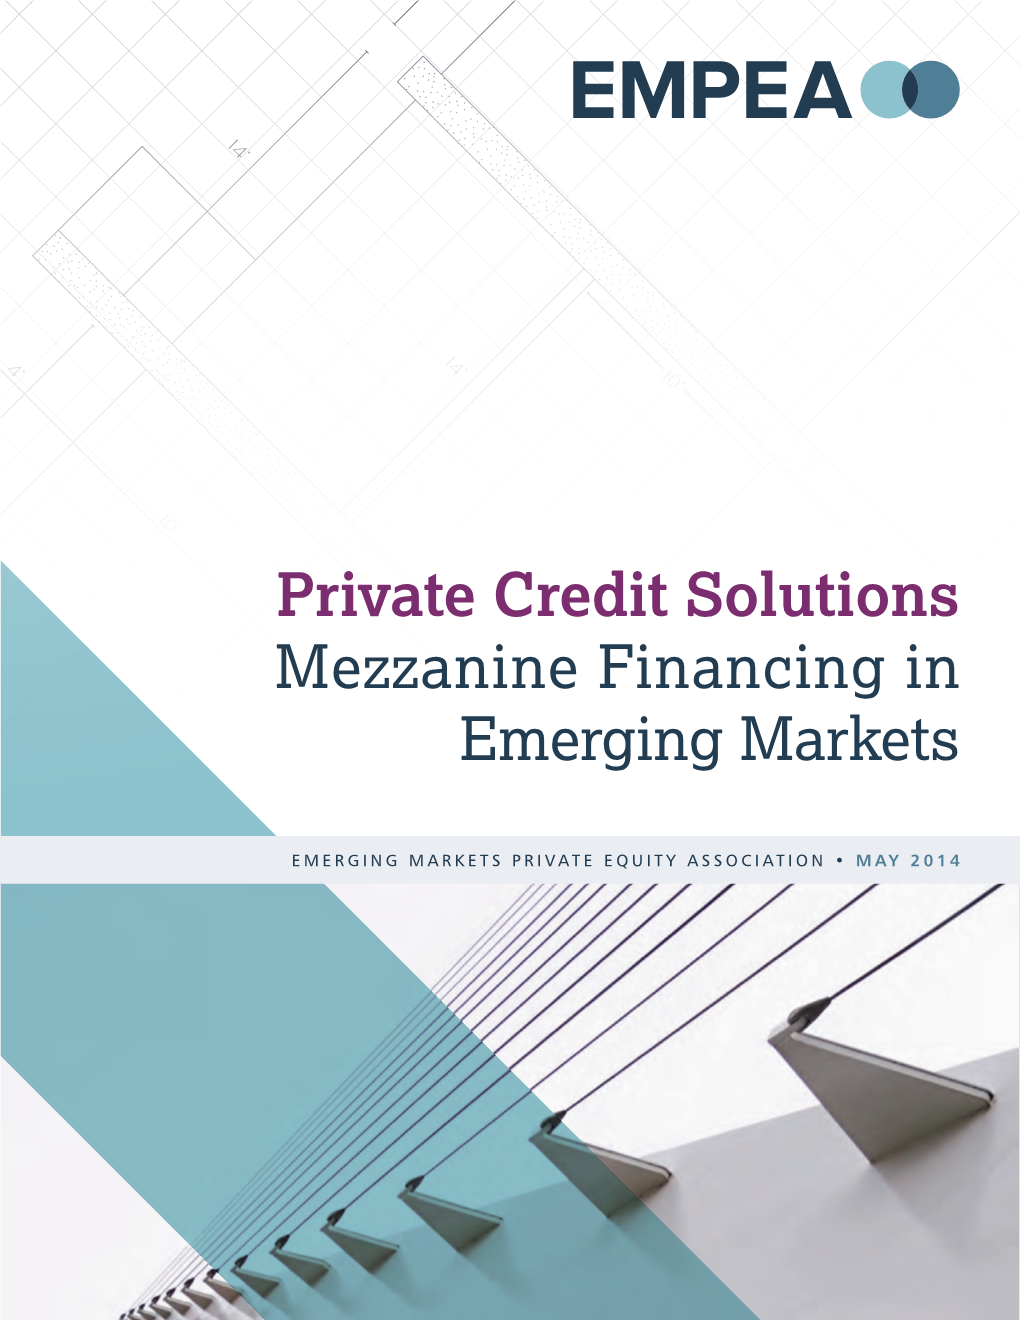 Private Credit Solutions Mezzanine Financing in Emerging Markets